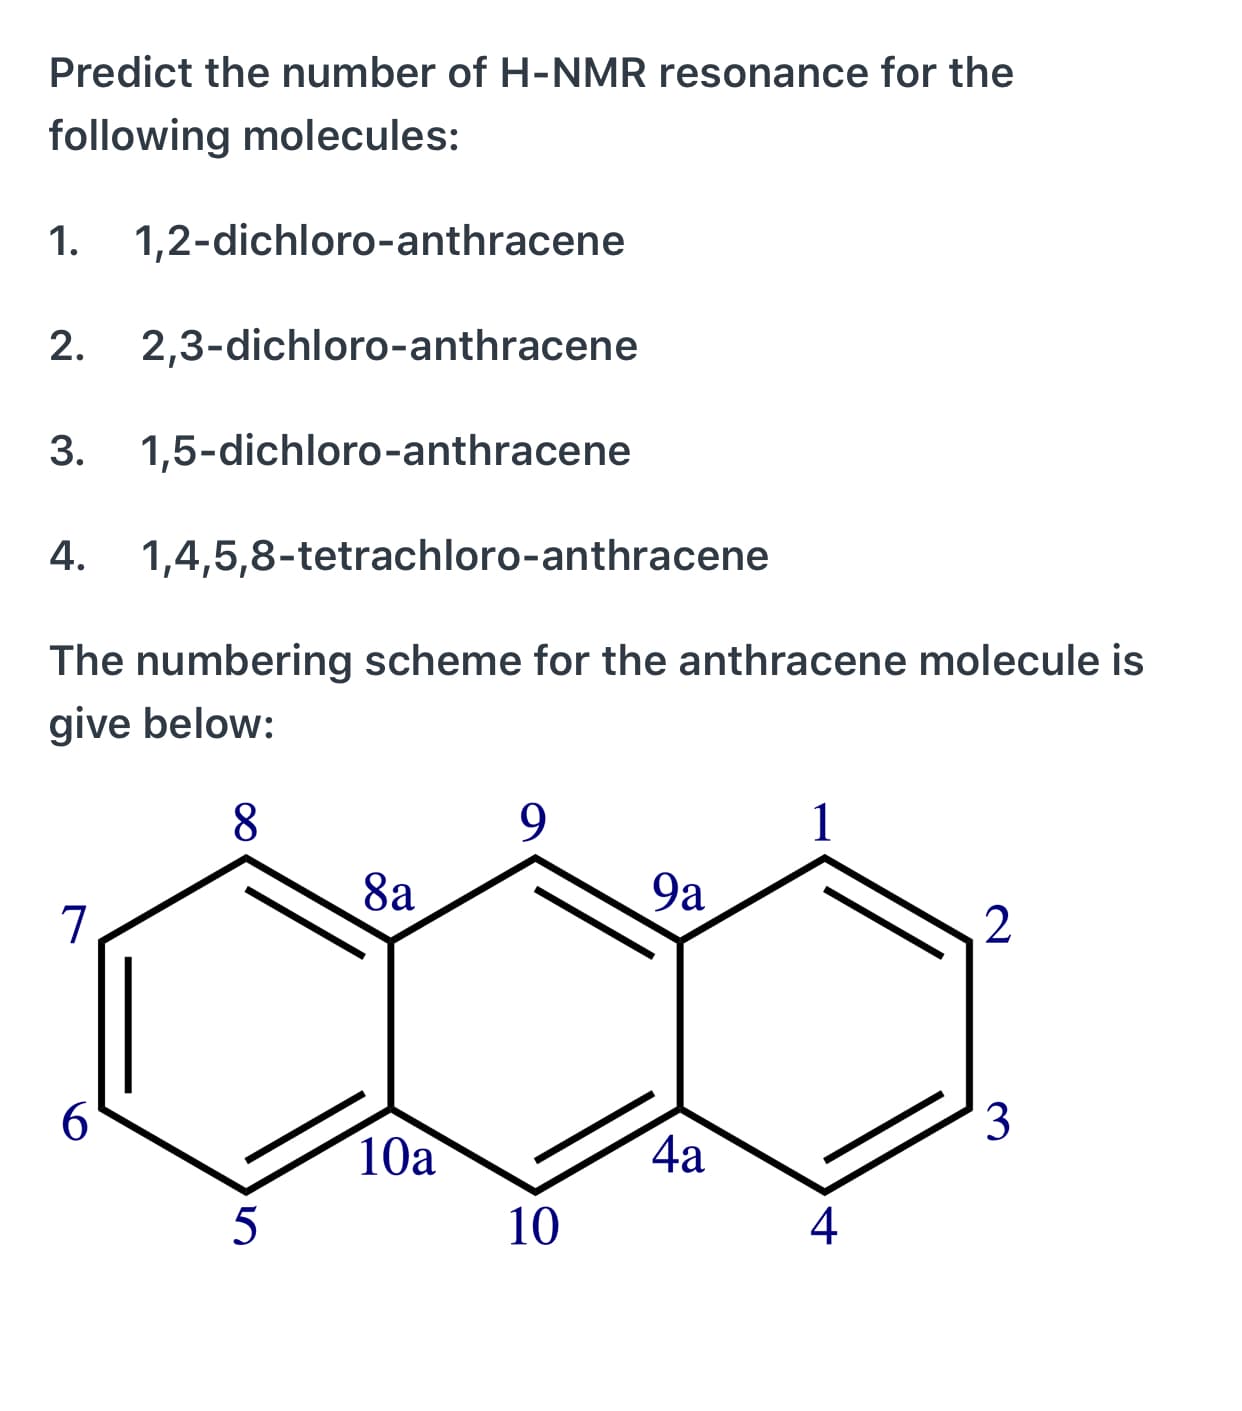 Predict the number of H-NMR resonance for the
following molecules:
1.
1,2-dichloro-anthracene
2.
2,3-dichloro-anthracene
3.
1,5-dichloro-anthracene
4.
1,4,5,8-tetrachloro-anthracene
The numbering scheme for the anthracene molecule is
give below:
8.
9.
8a
9a
6.
3
10a
4a
5
10
4
